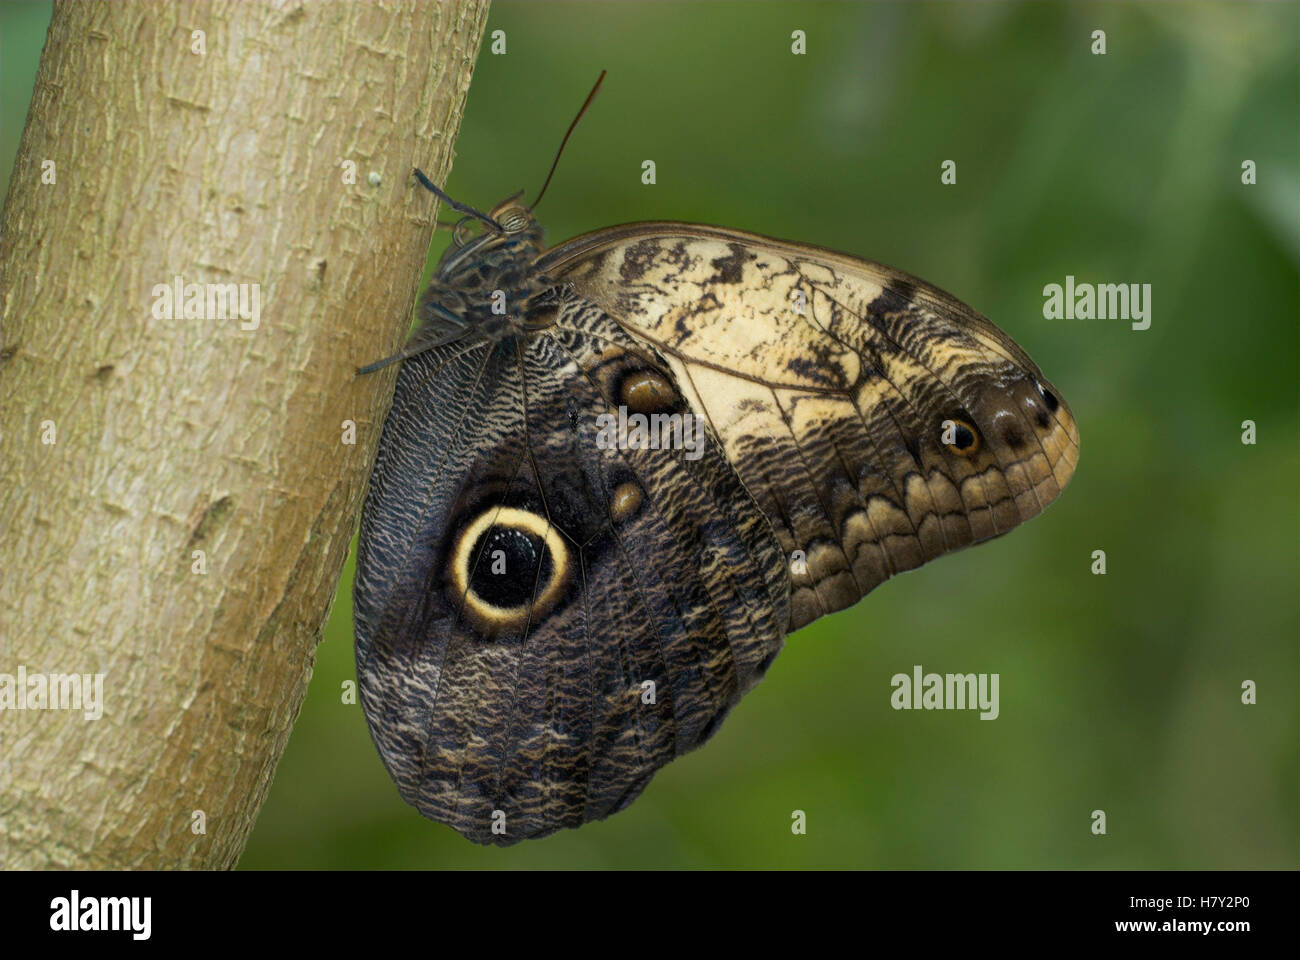 Owl Butterfly Caligo species perched on tree trunk Stock Photo